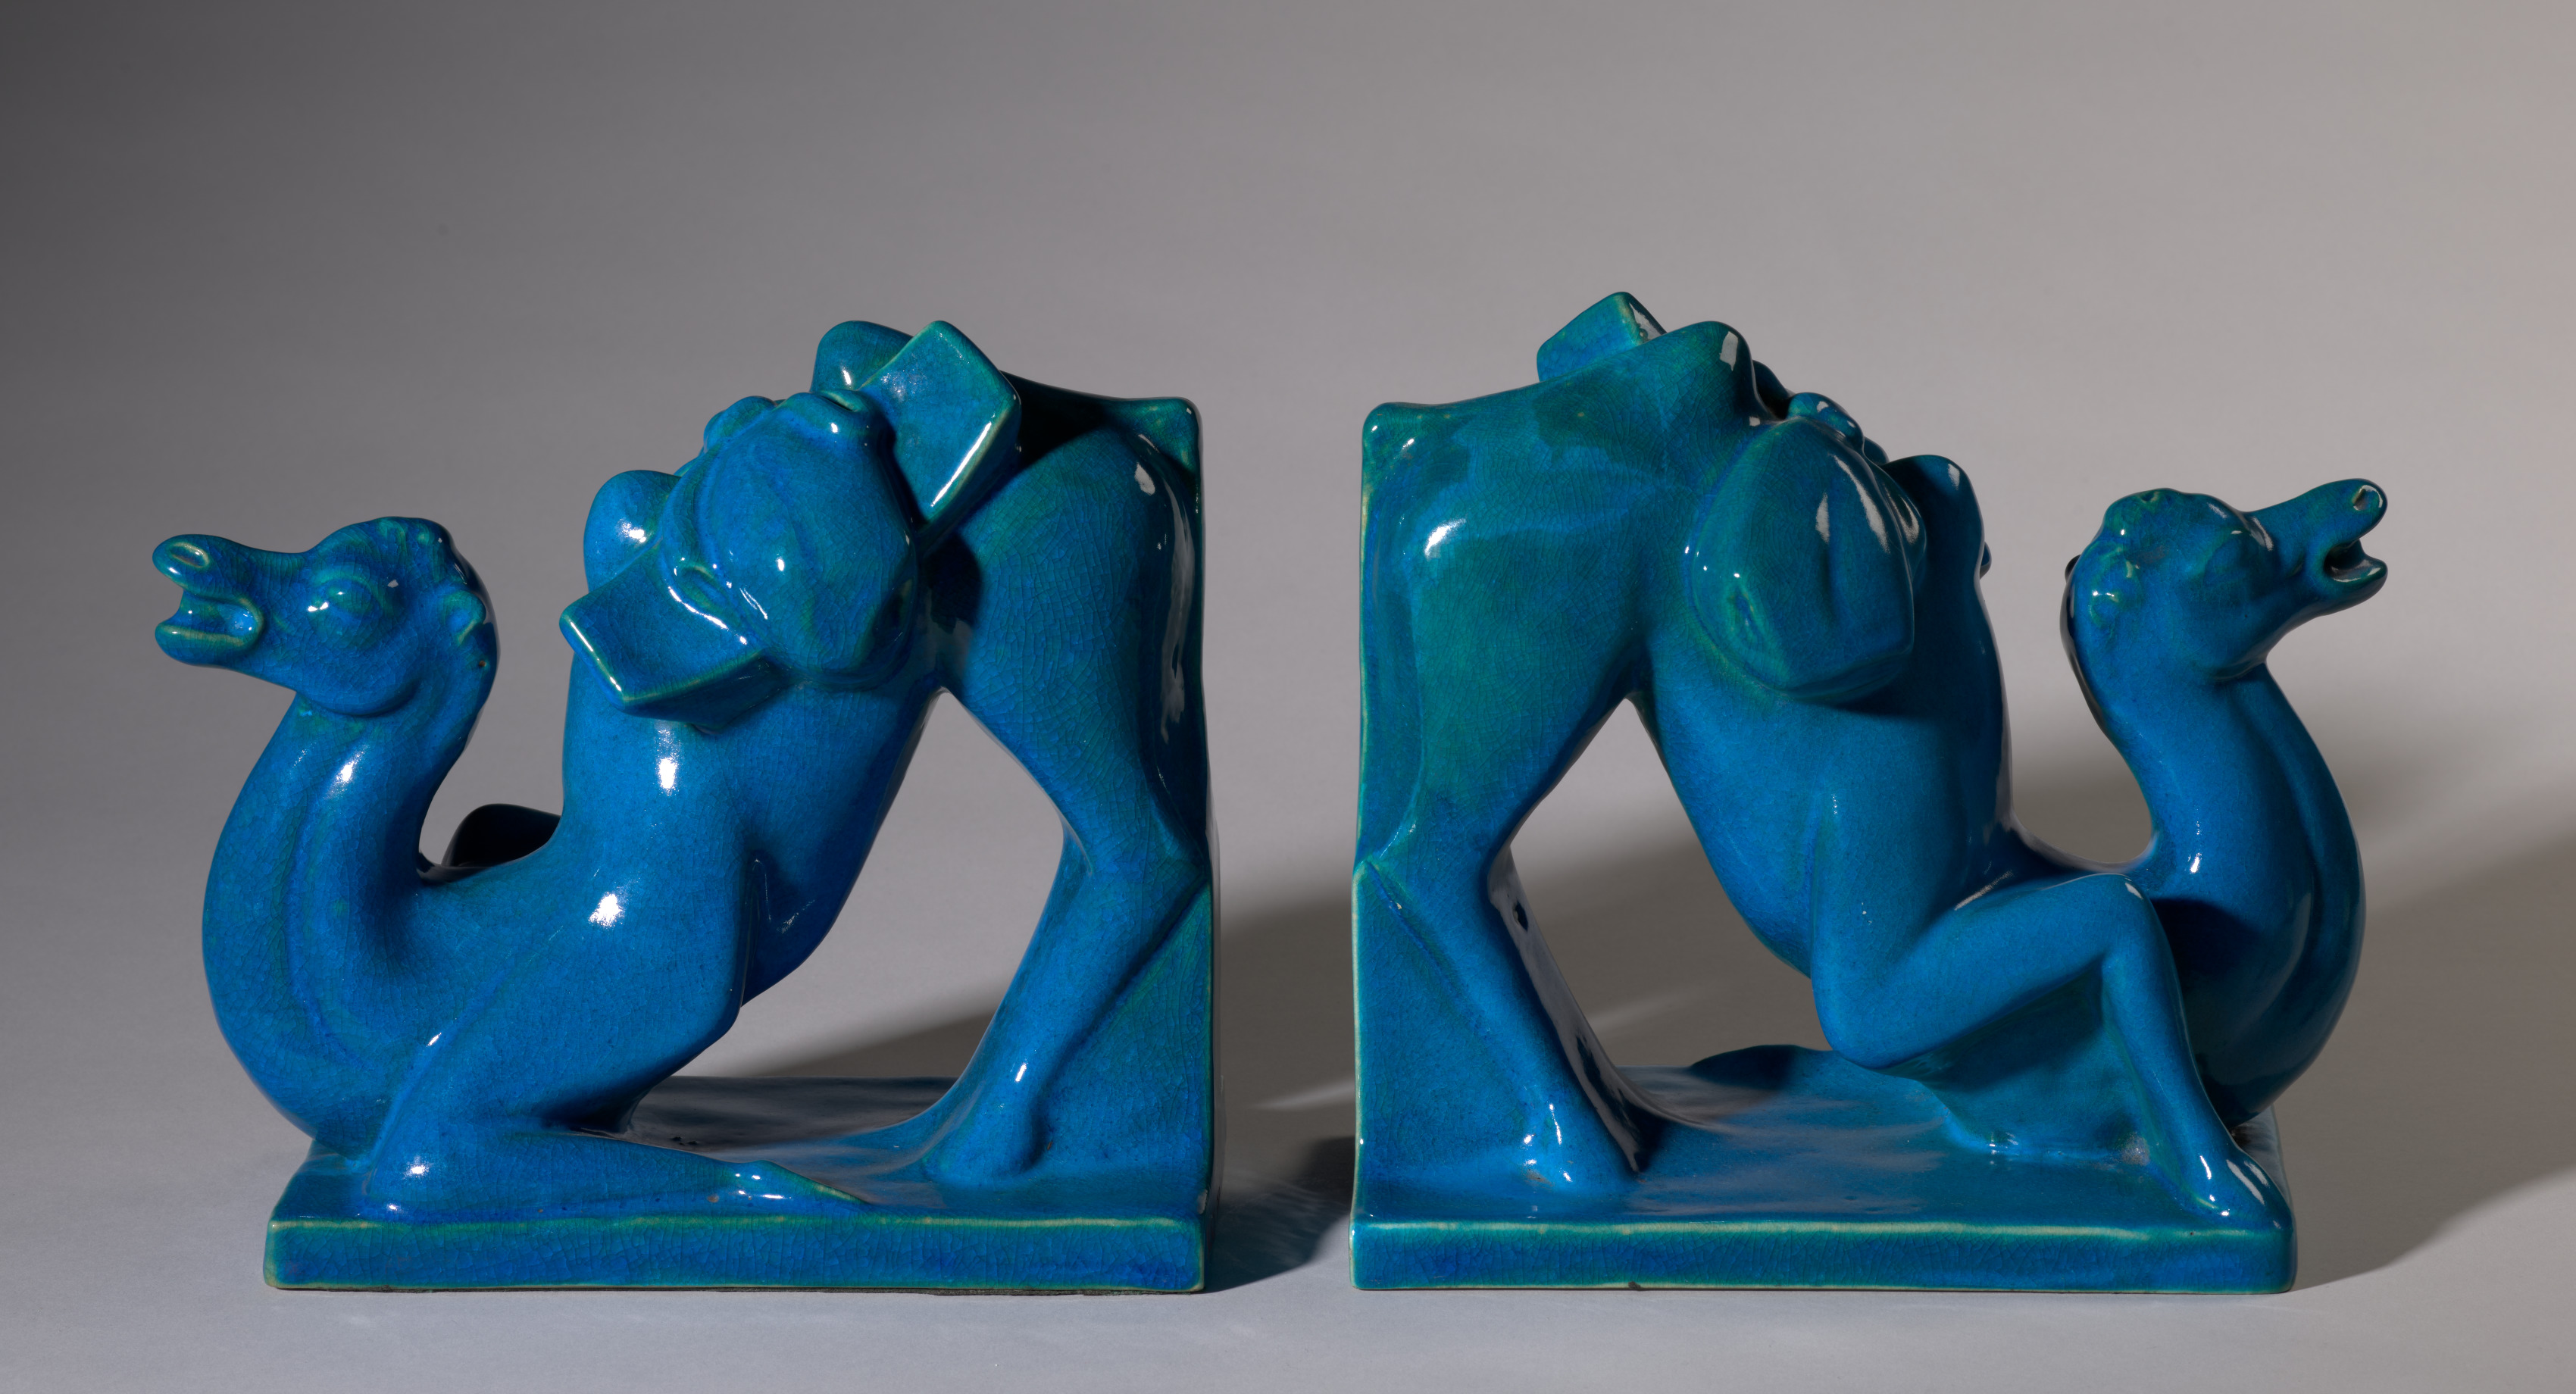 Pair of Camel Bookends